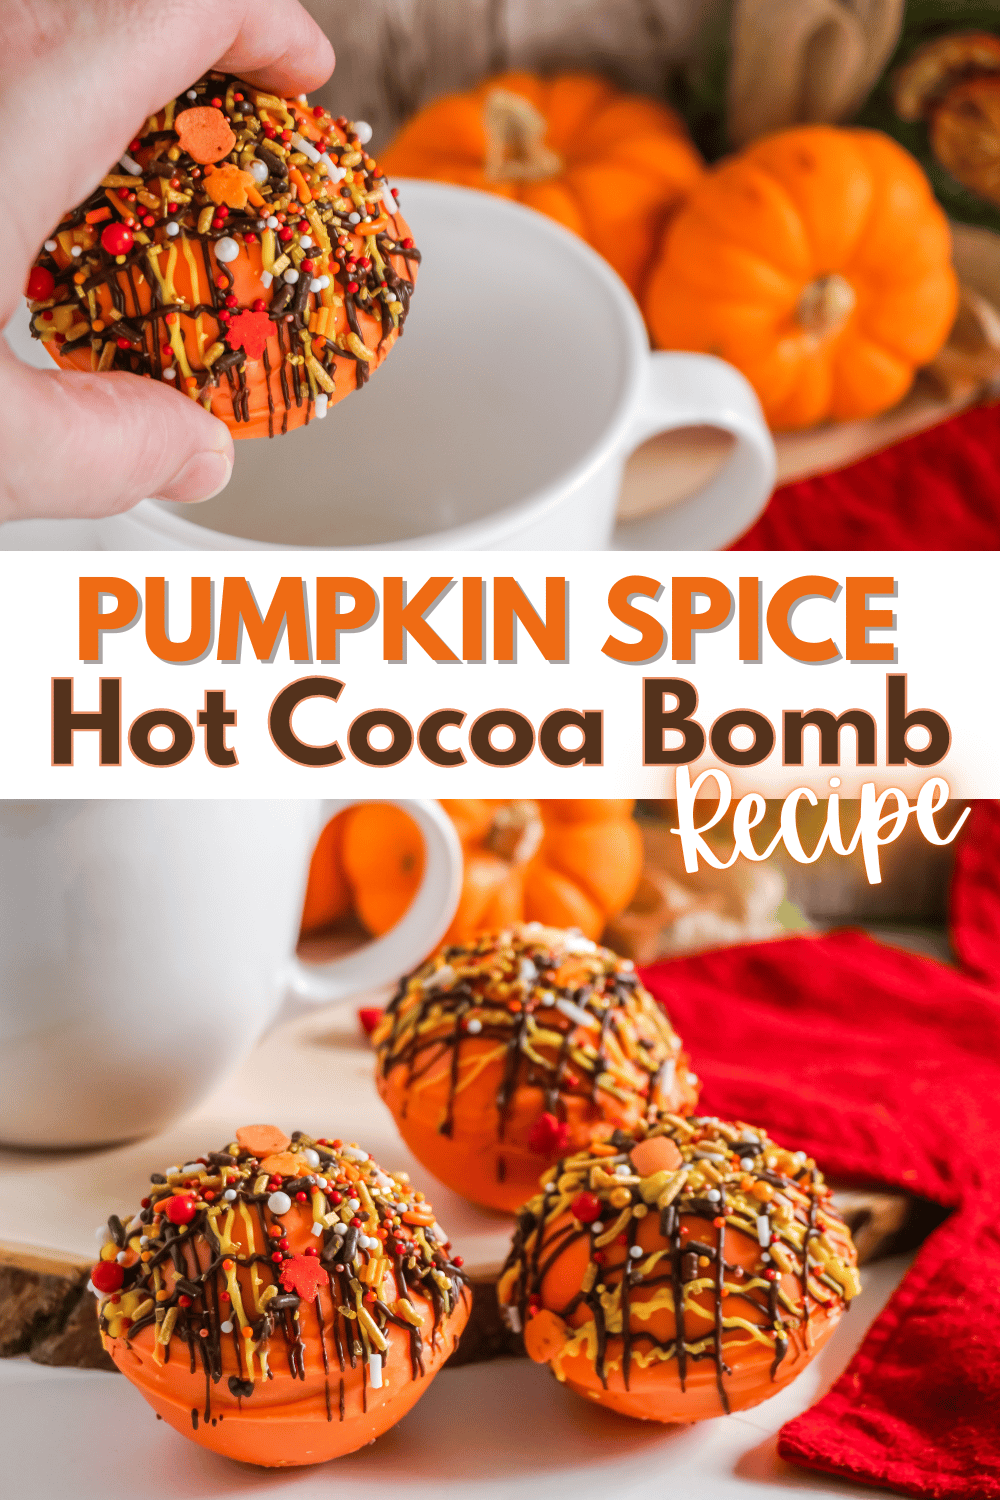 This Pumpkin Spice Hot Cocoa Bomb recipe is the perfect way to celebrate Fall! They make the perfect gift for friends and family. #hotcocoabomb #pumpkinspice #hotcocoa #fallrecipe via @wondermomwannab